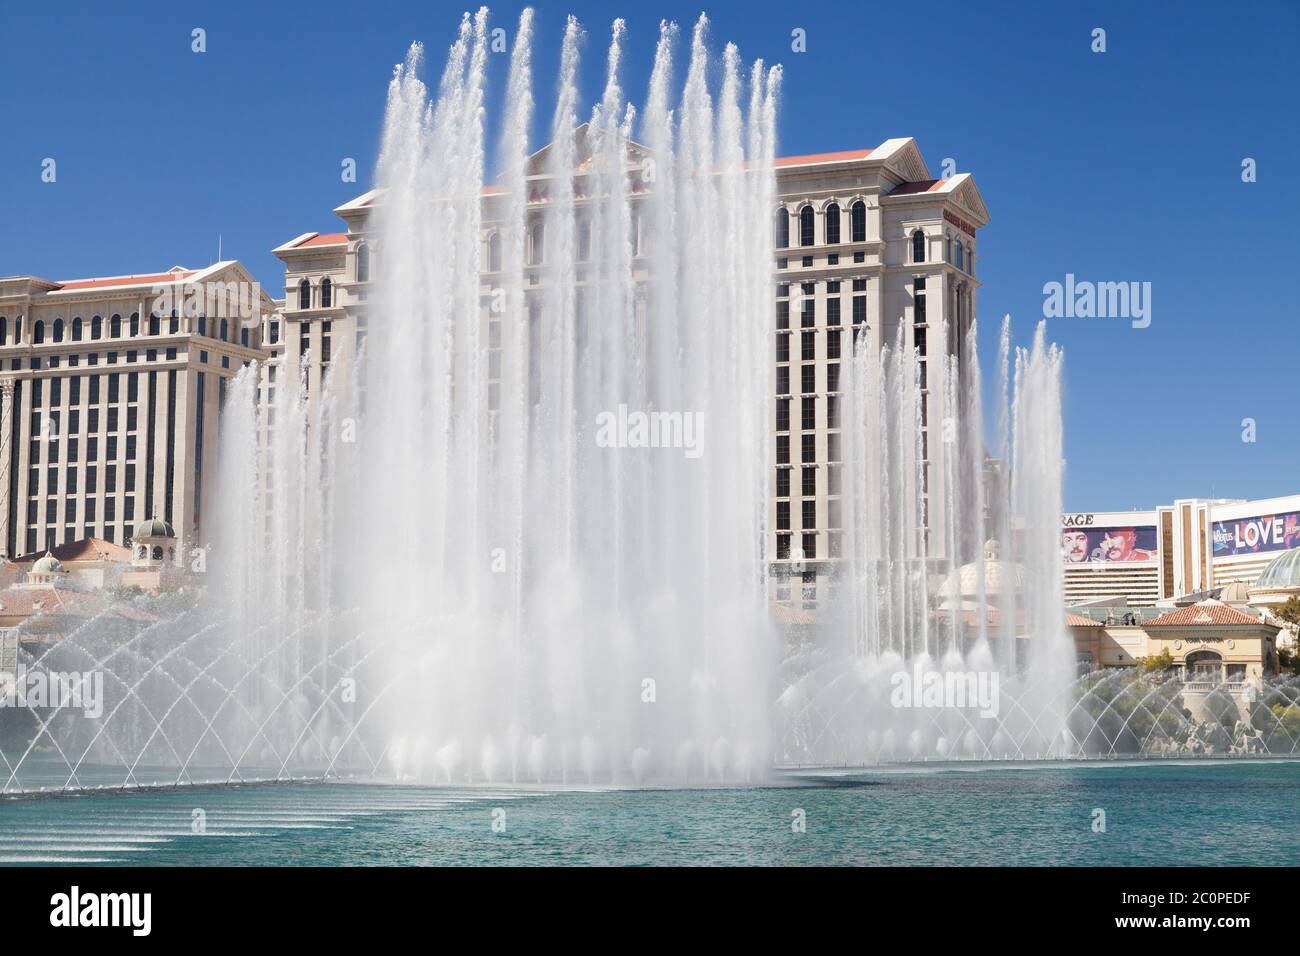 Las Vegas, Nevada - August 30, 2019: The Fountains of Bellagio during the day in Las Vegas, Nevada, United States. Stock Photo